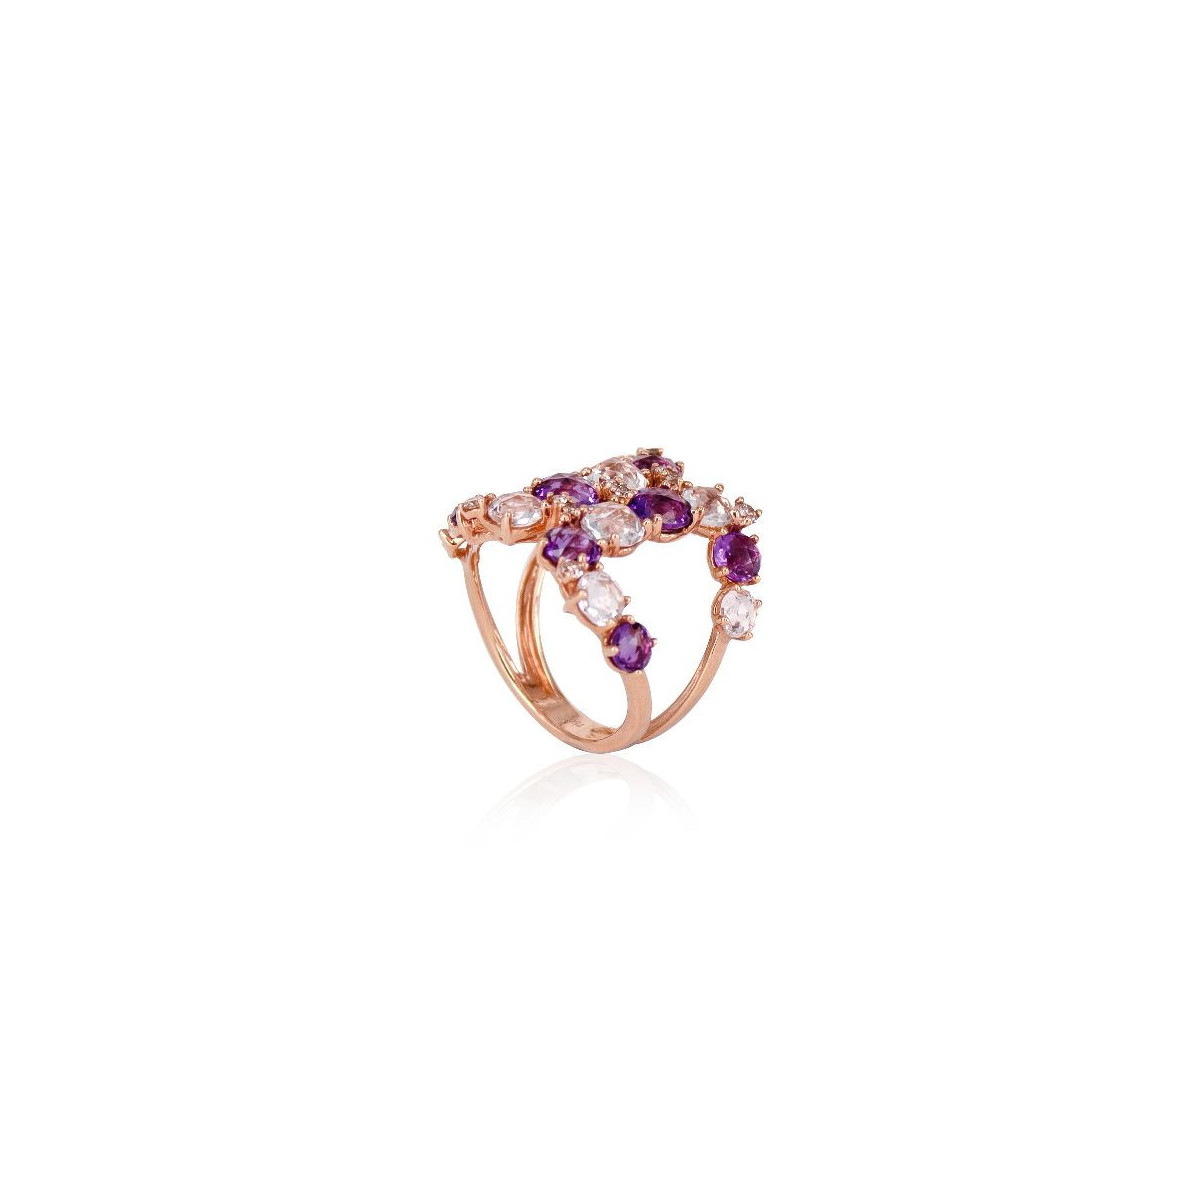 ROSE GOLD RING WITH DIAMONDS, AMETHYSTS AND WHITE TOPAZ